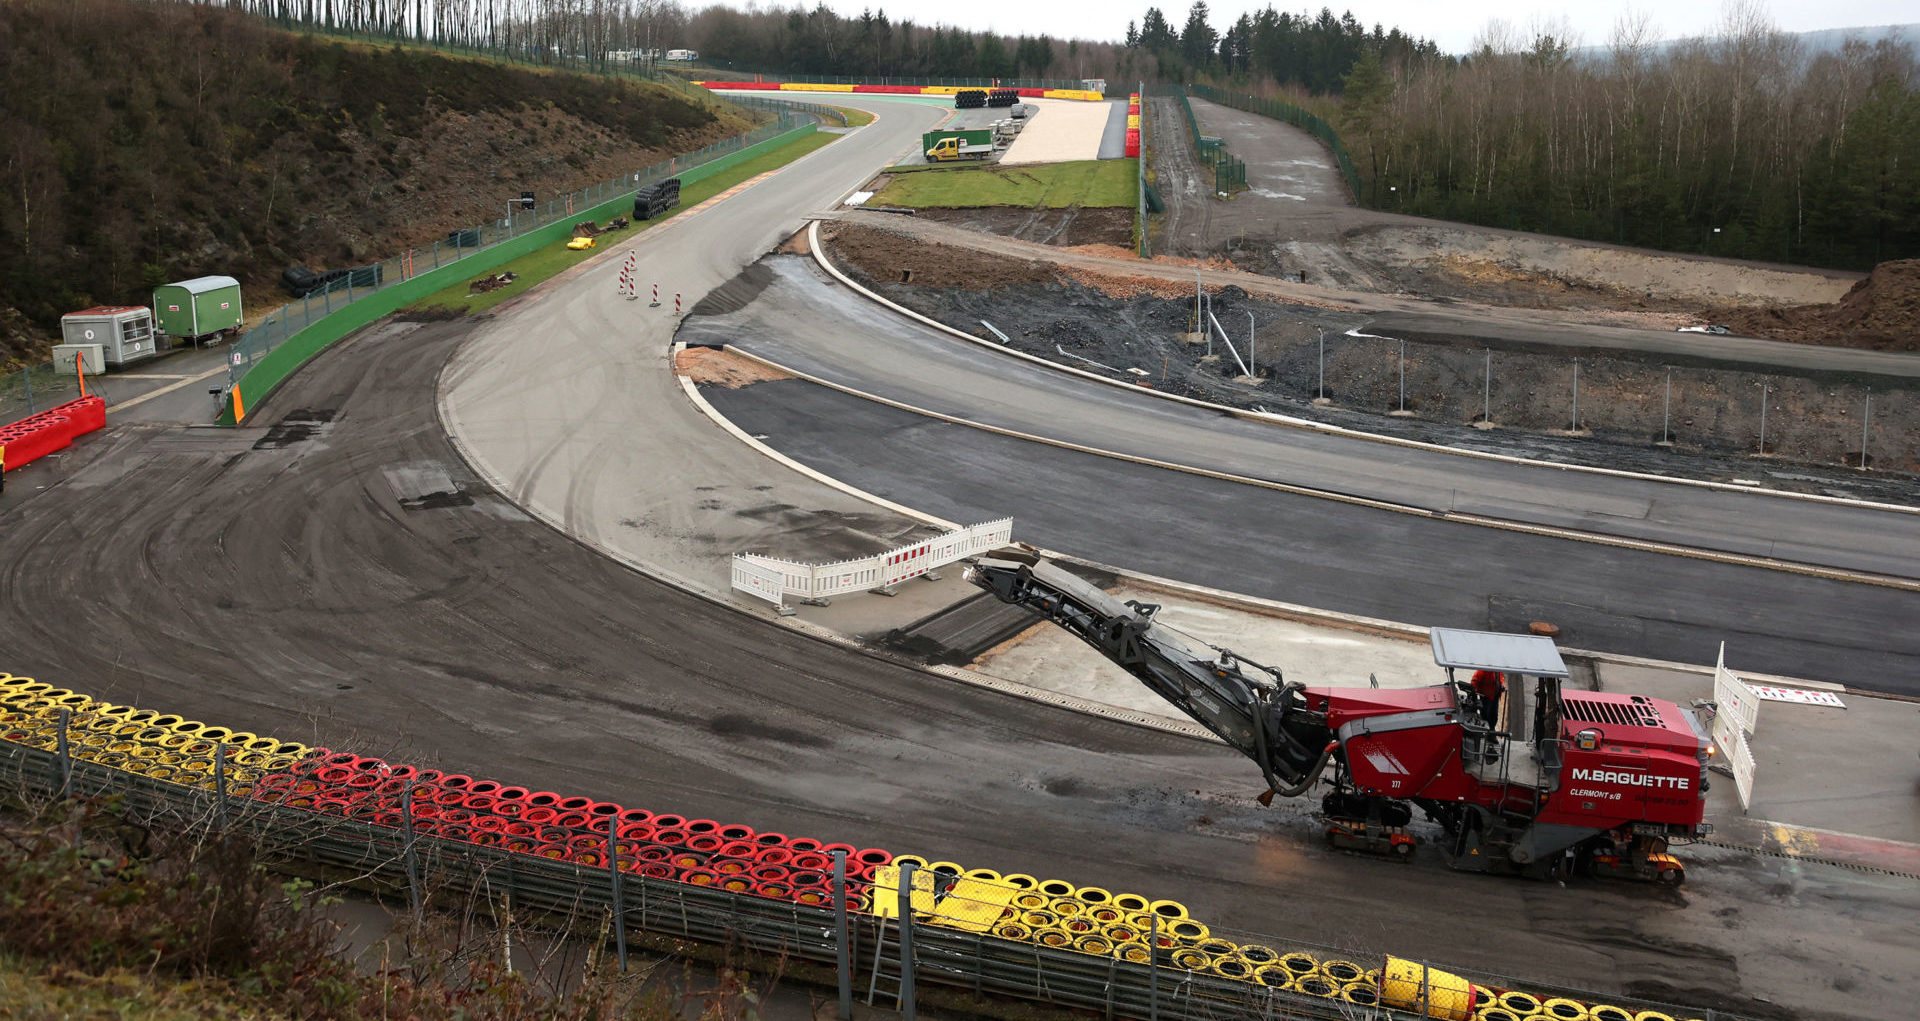 Adding new turns just for motorcycles is part of the renovation plan at Circuit de Spa-Francorchamps. Photo courtesy Discovery Sports Events.